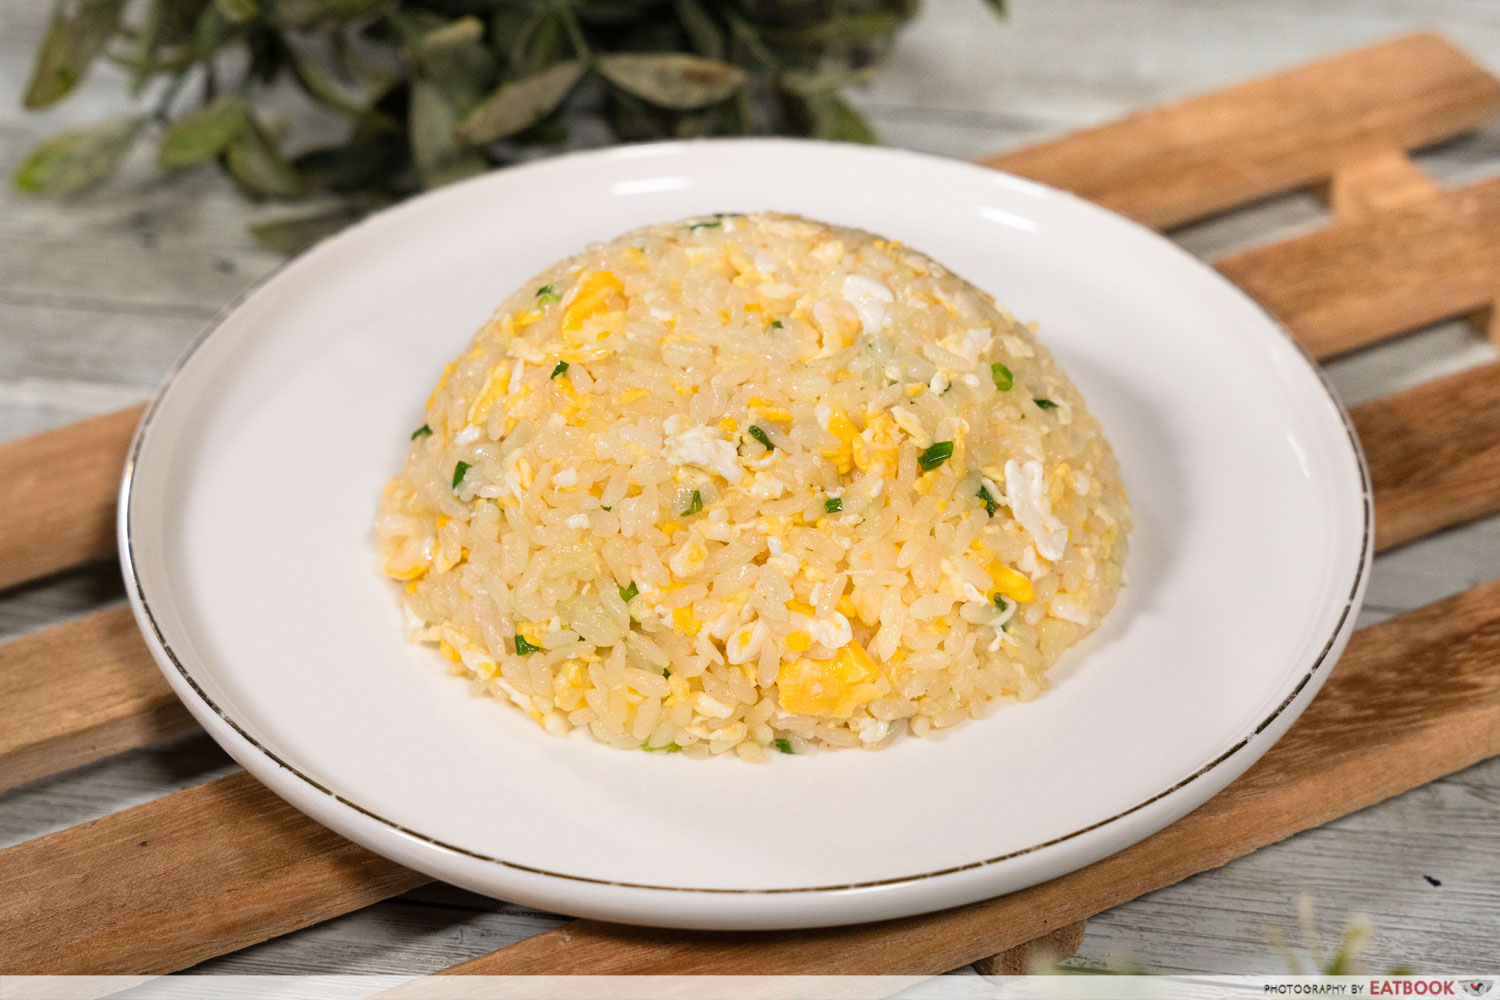 viral dishes - egg fried rice final